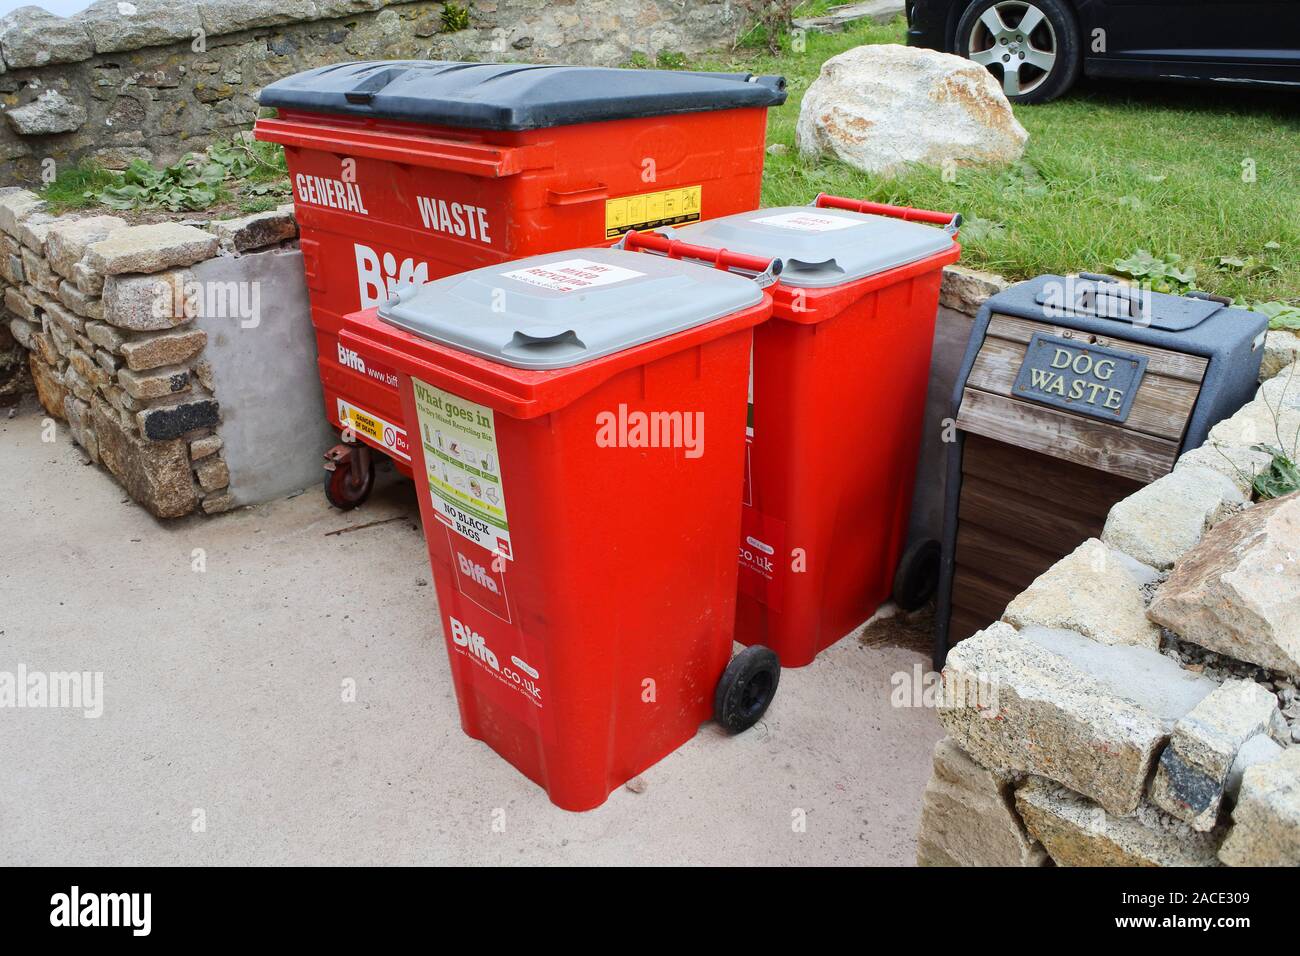 A collection of waste bins in a car park - John Gollop Stock Photo